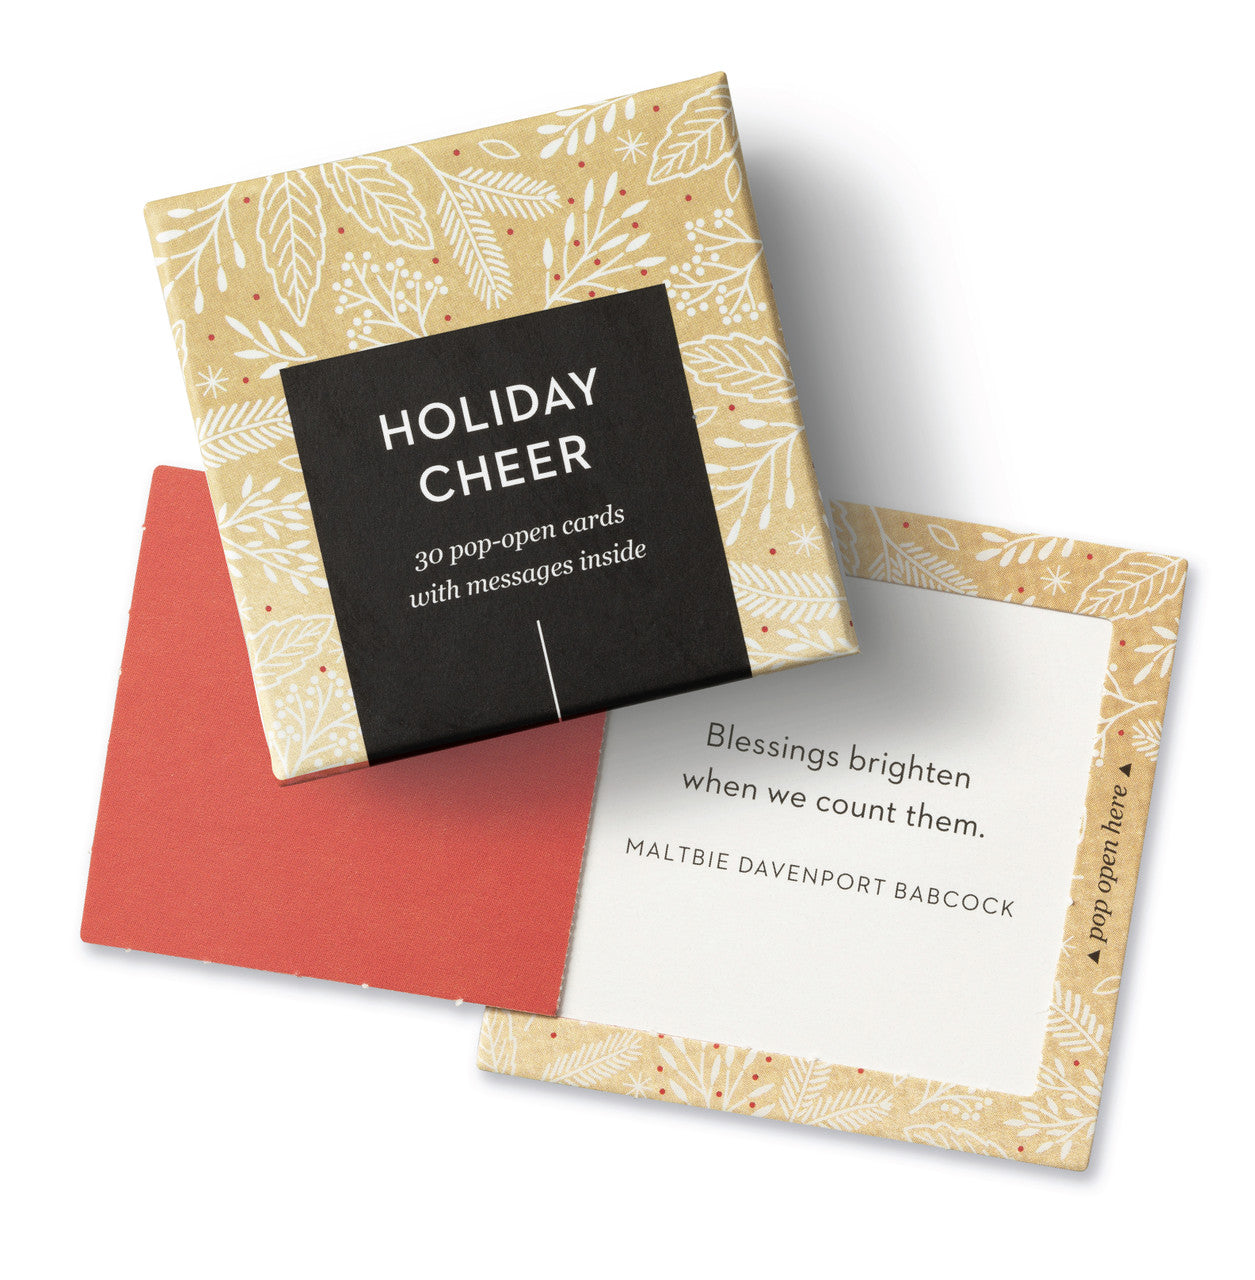 ThoughtFulls Pop-Open Cards, Holiday Cheer